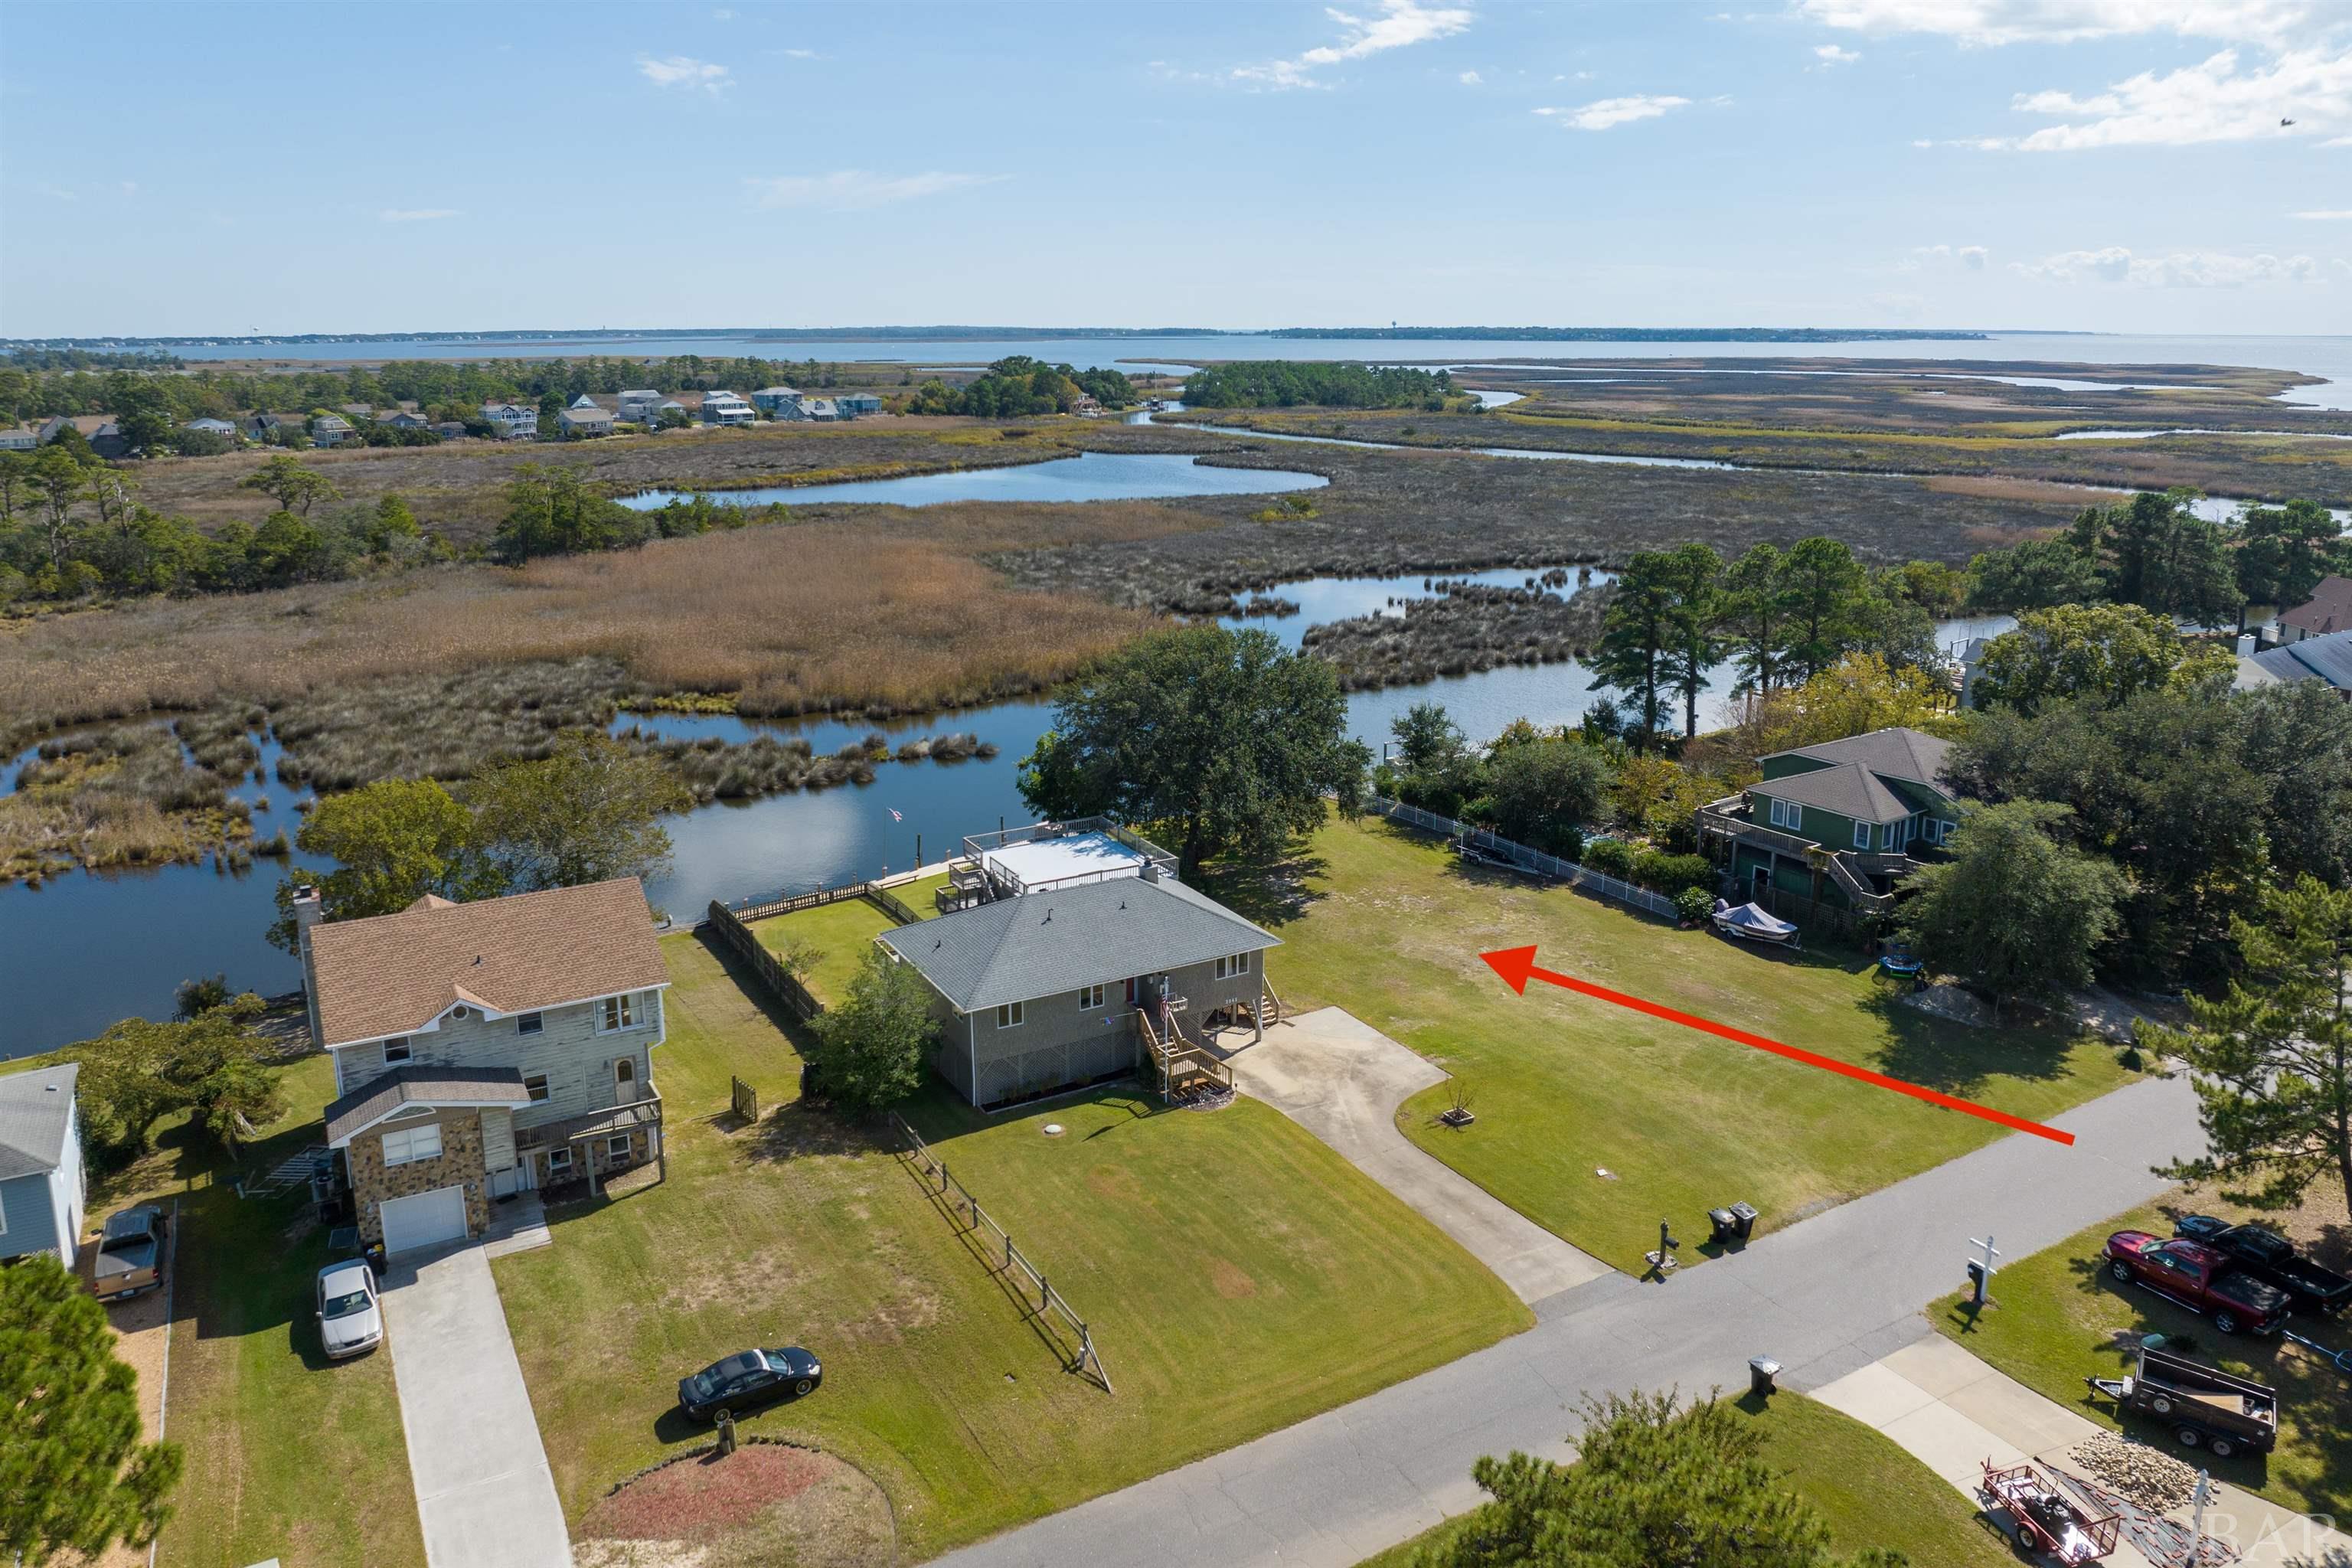 Fabulous, canal front lot in Kitty Hawk Landing has been cleared, filled, bulkheaded and has a jet ski lift. This location provides fantastic views of the sunrising over the marsh. Kitty Hawk Landing has deep water canals leading out to the sound for your boating pleasure and private, deeded beach access with bath house. It feels private and tucked away while providing easy access to shopping and restaurants via The Woods Rd or Kitty Hawk Rd.  Check it out today!